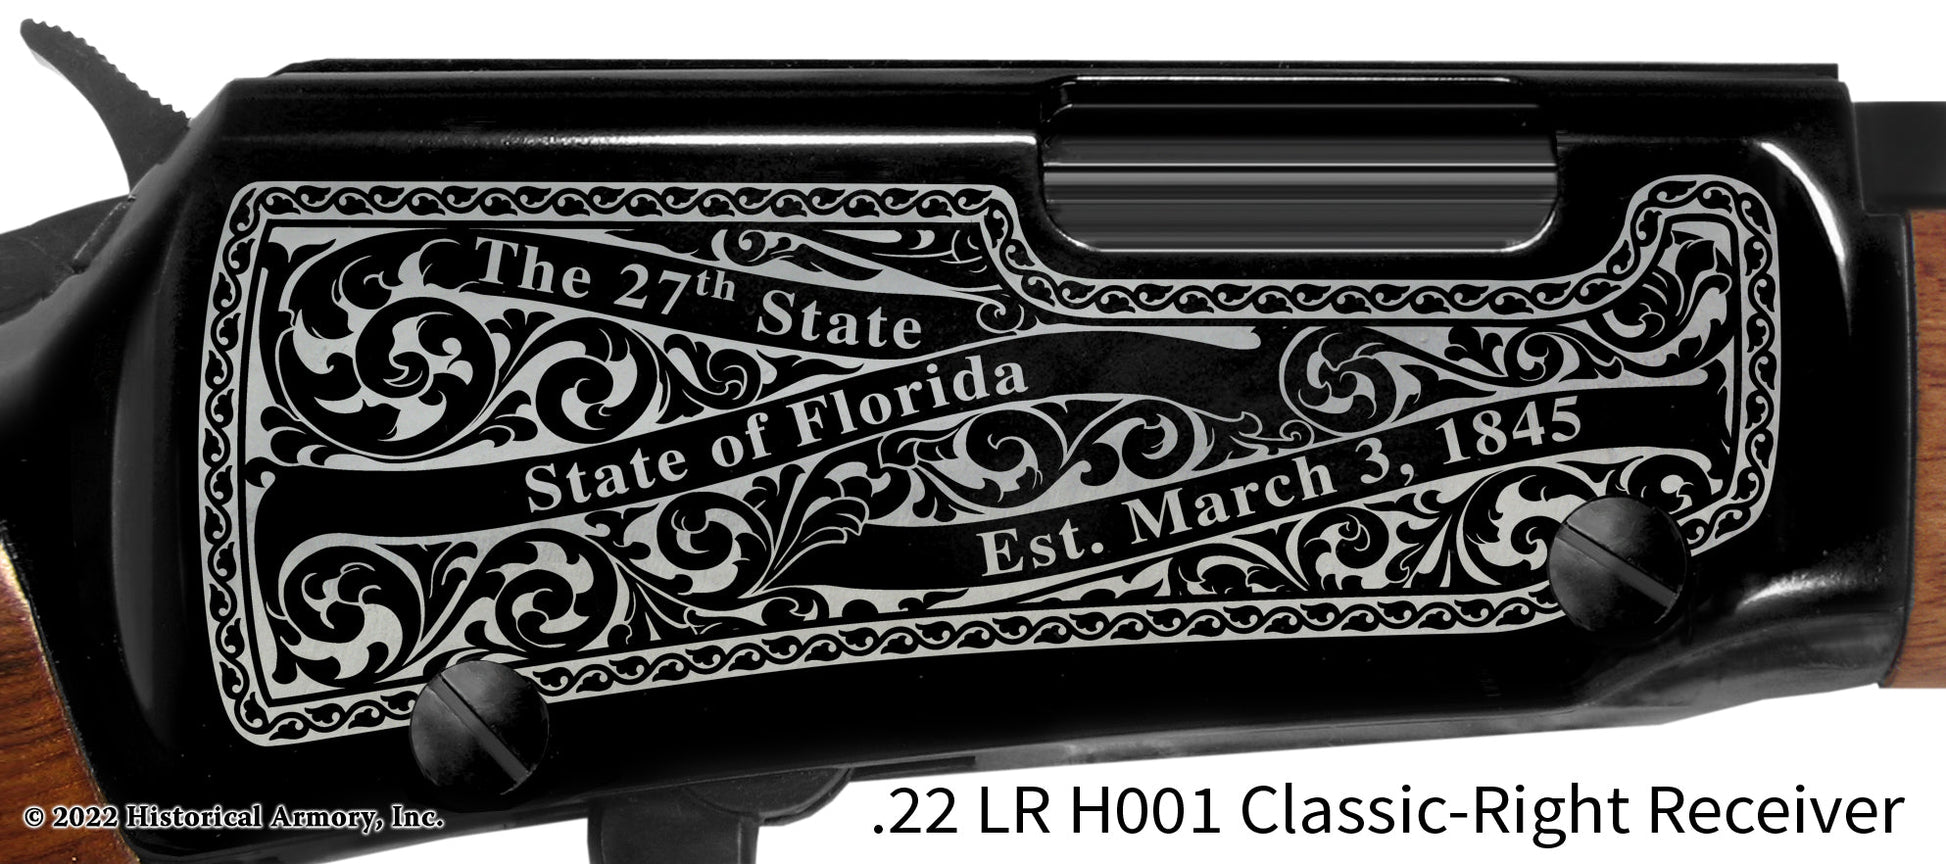 Sumter County Florida Engraved Henry H001 Rifle